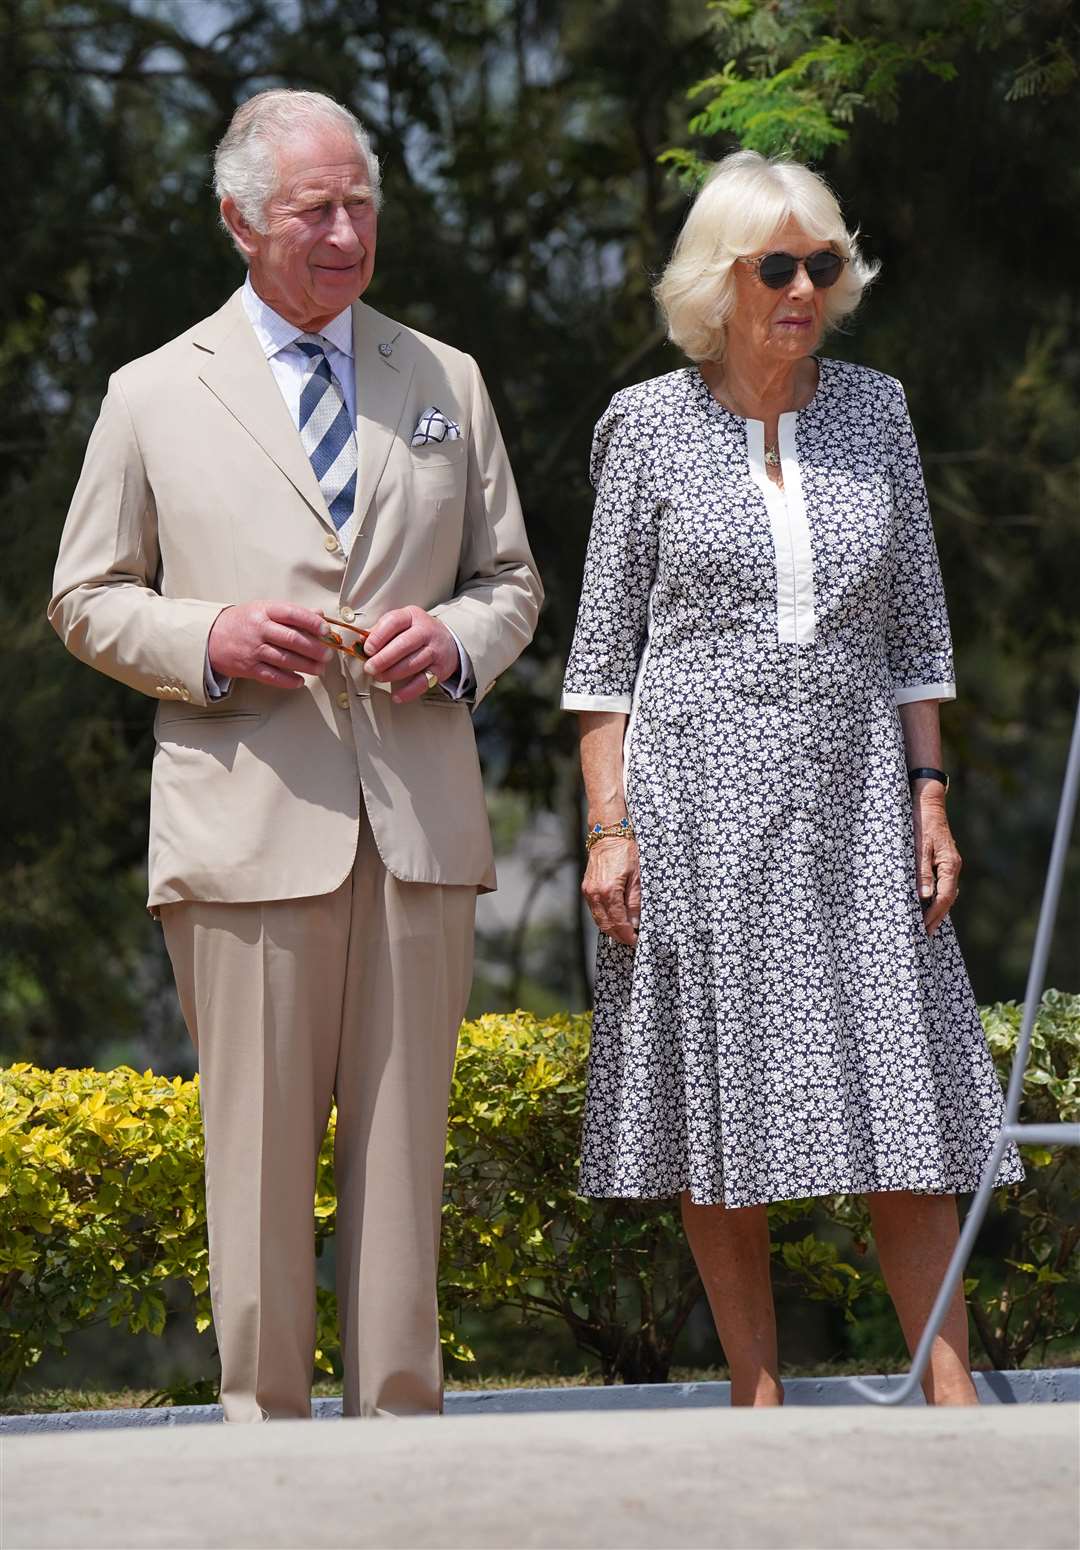 The Prince of Wales and Duchess of Cornwall said they are ‘deeply saddened’ by the destruction caused by the floods in Pakistan (Jonathan Brady/PA)